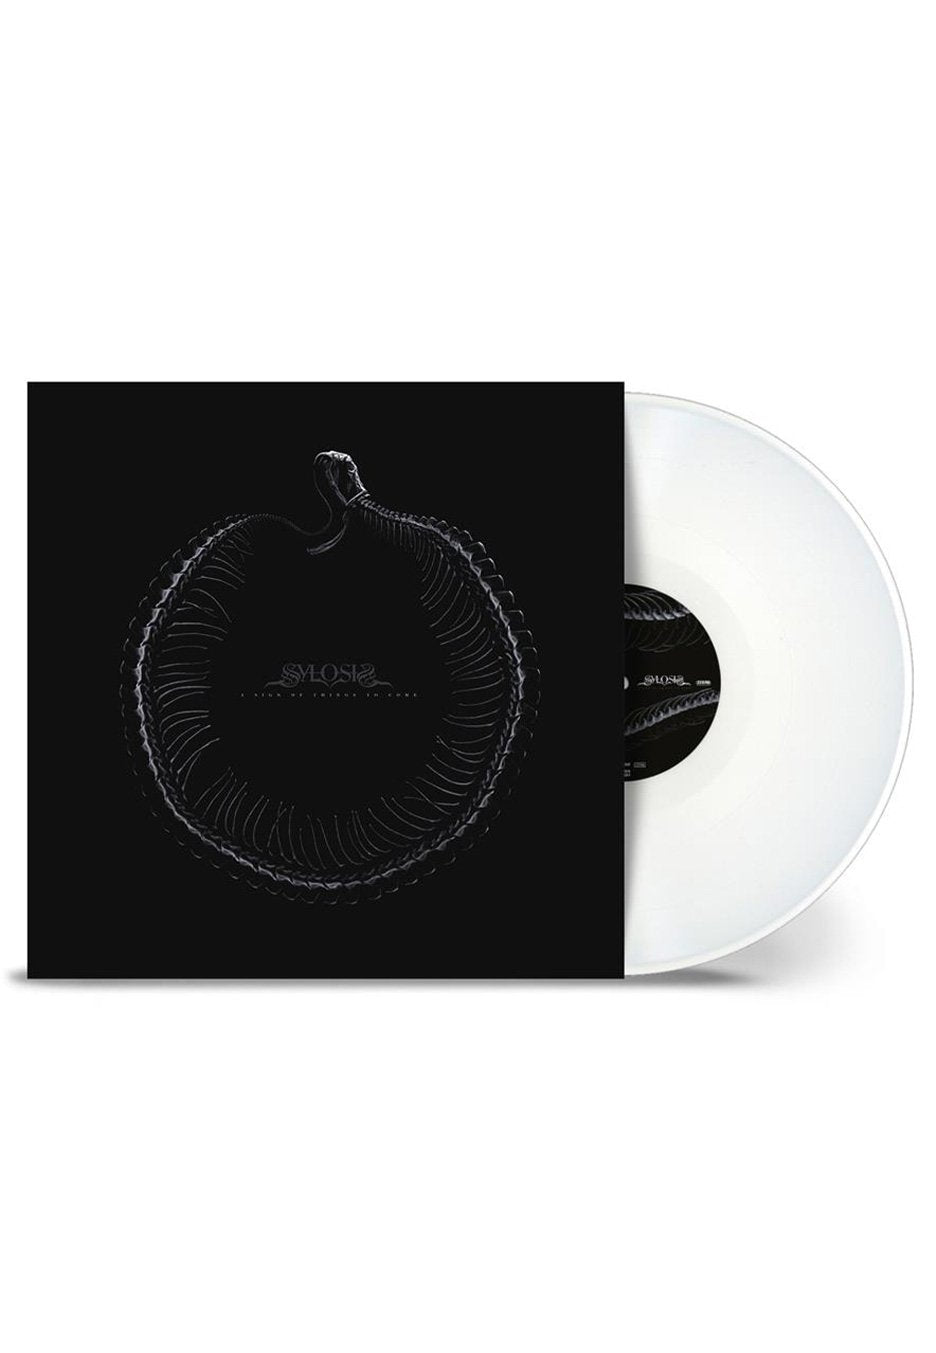 Sylosis - A Sign Of Things To Come Ltd. White - Colored Vinyl